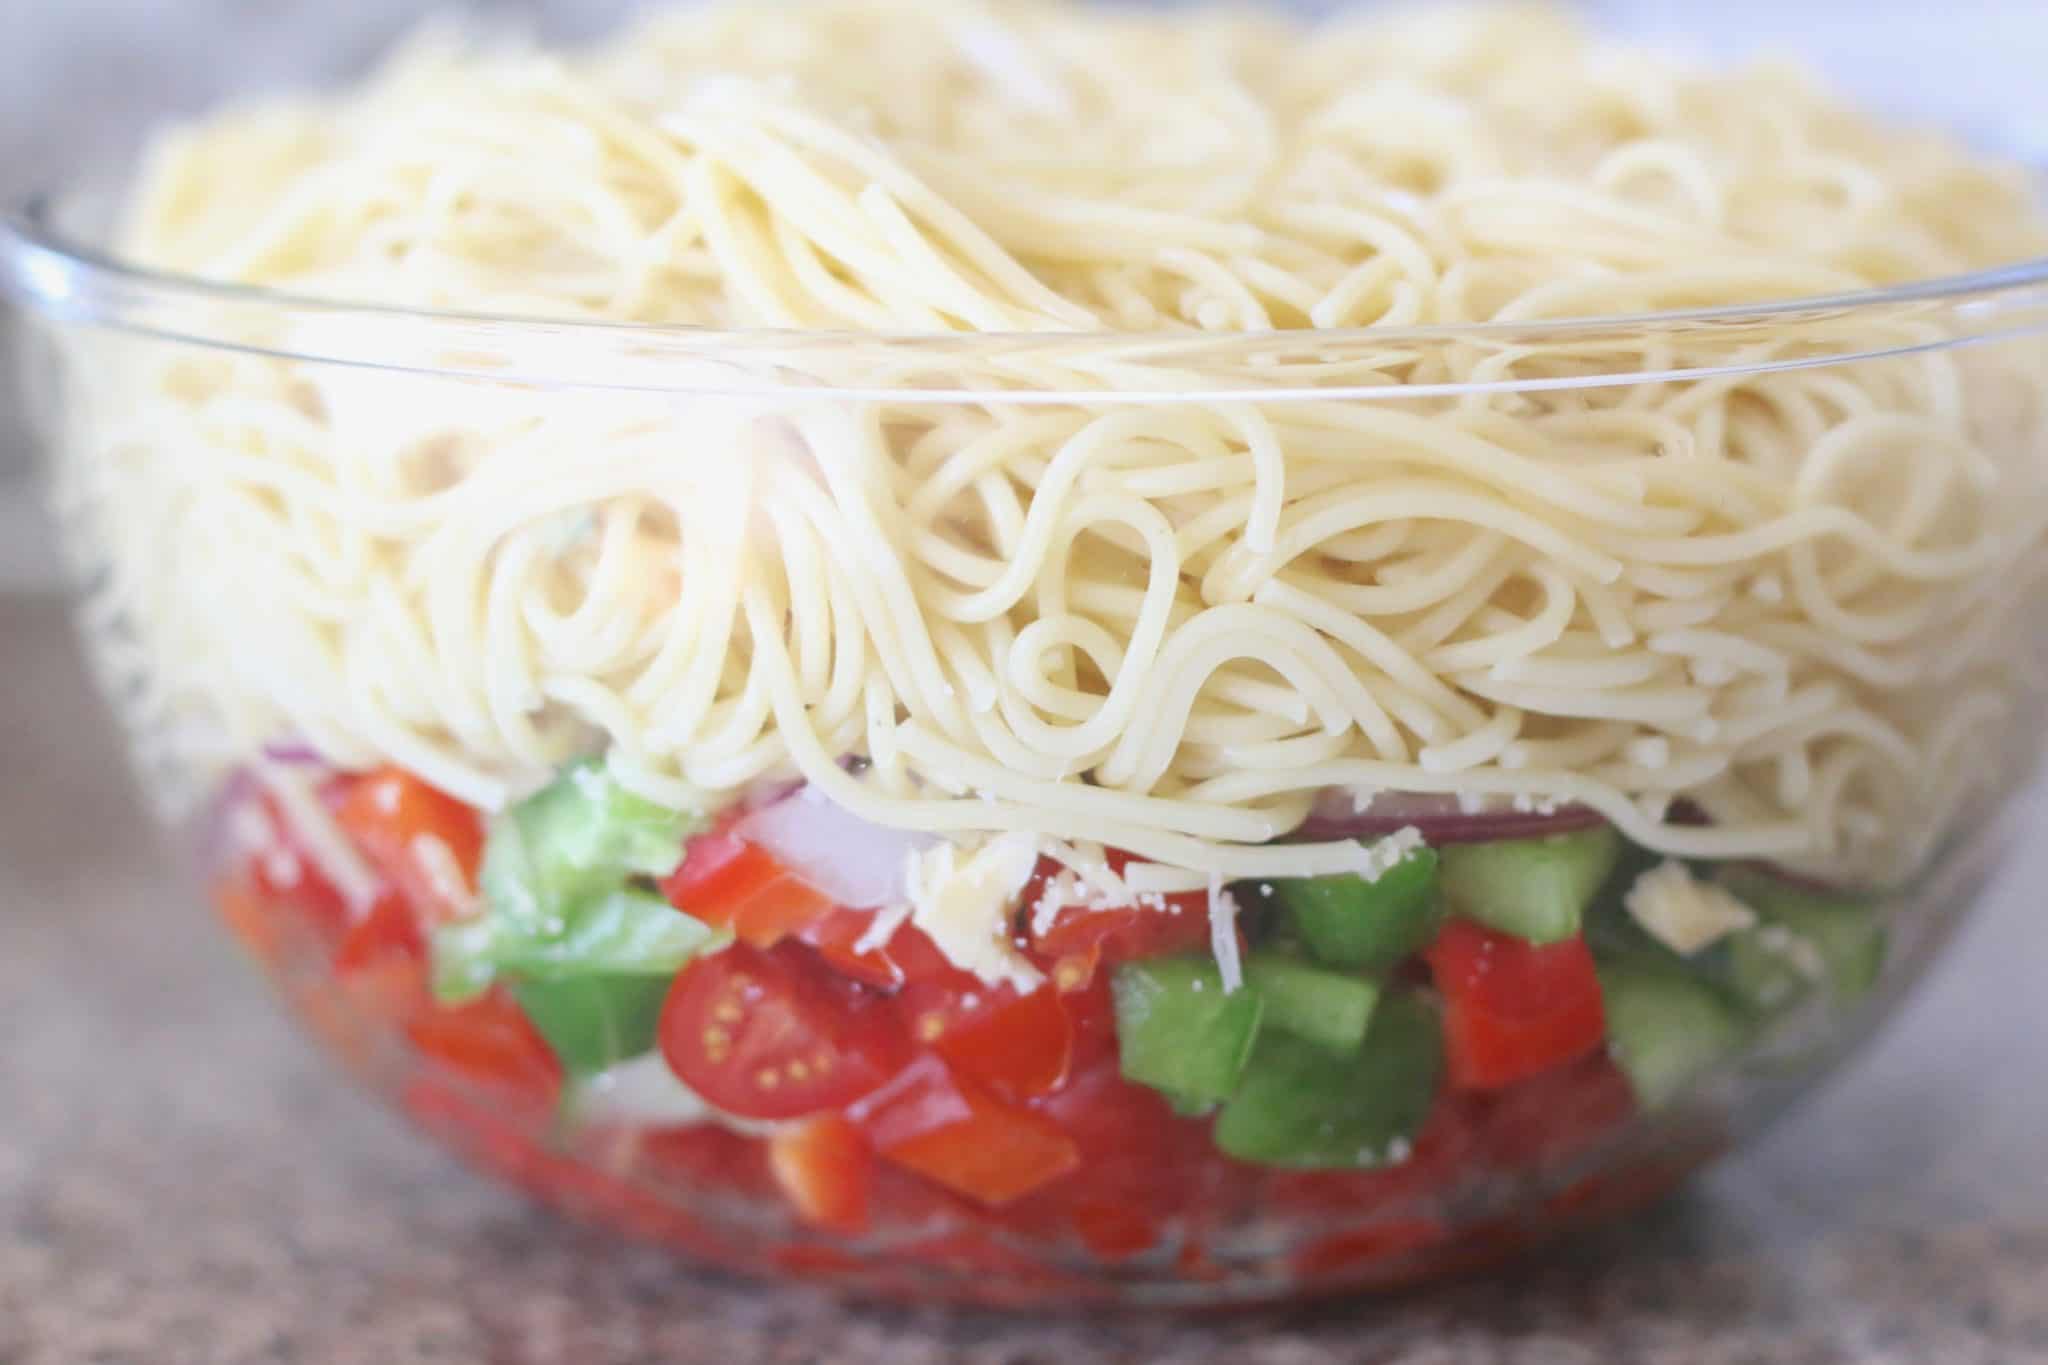 cooked spaghetti noodles, grape tomatoes, peppers, onions in a clear bowl.